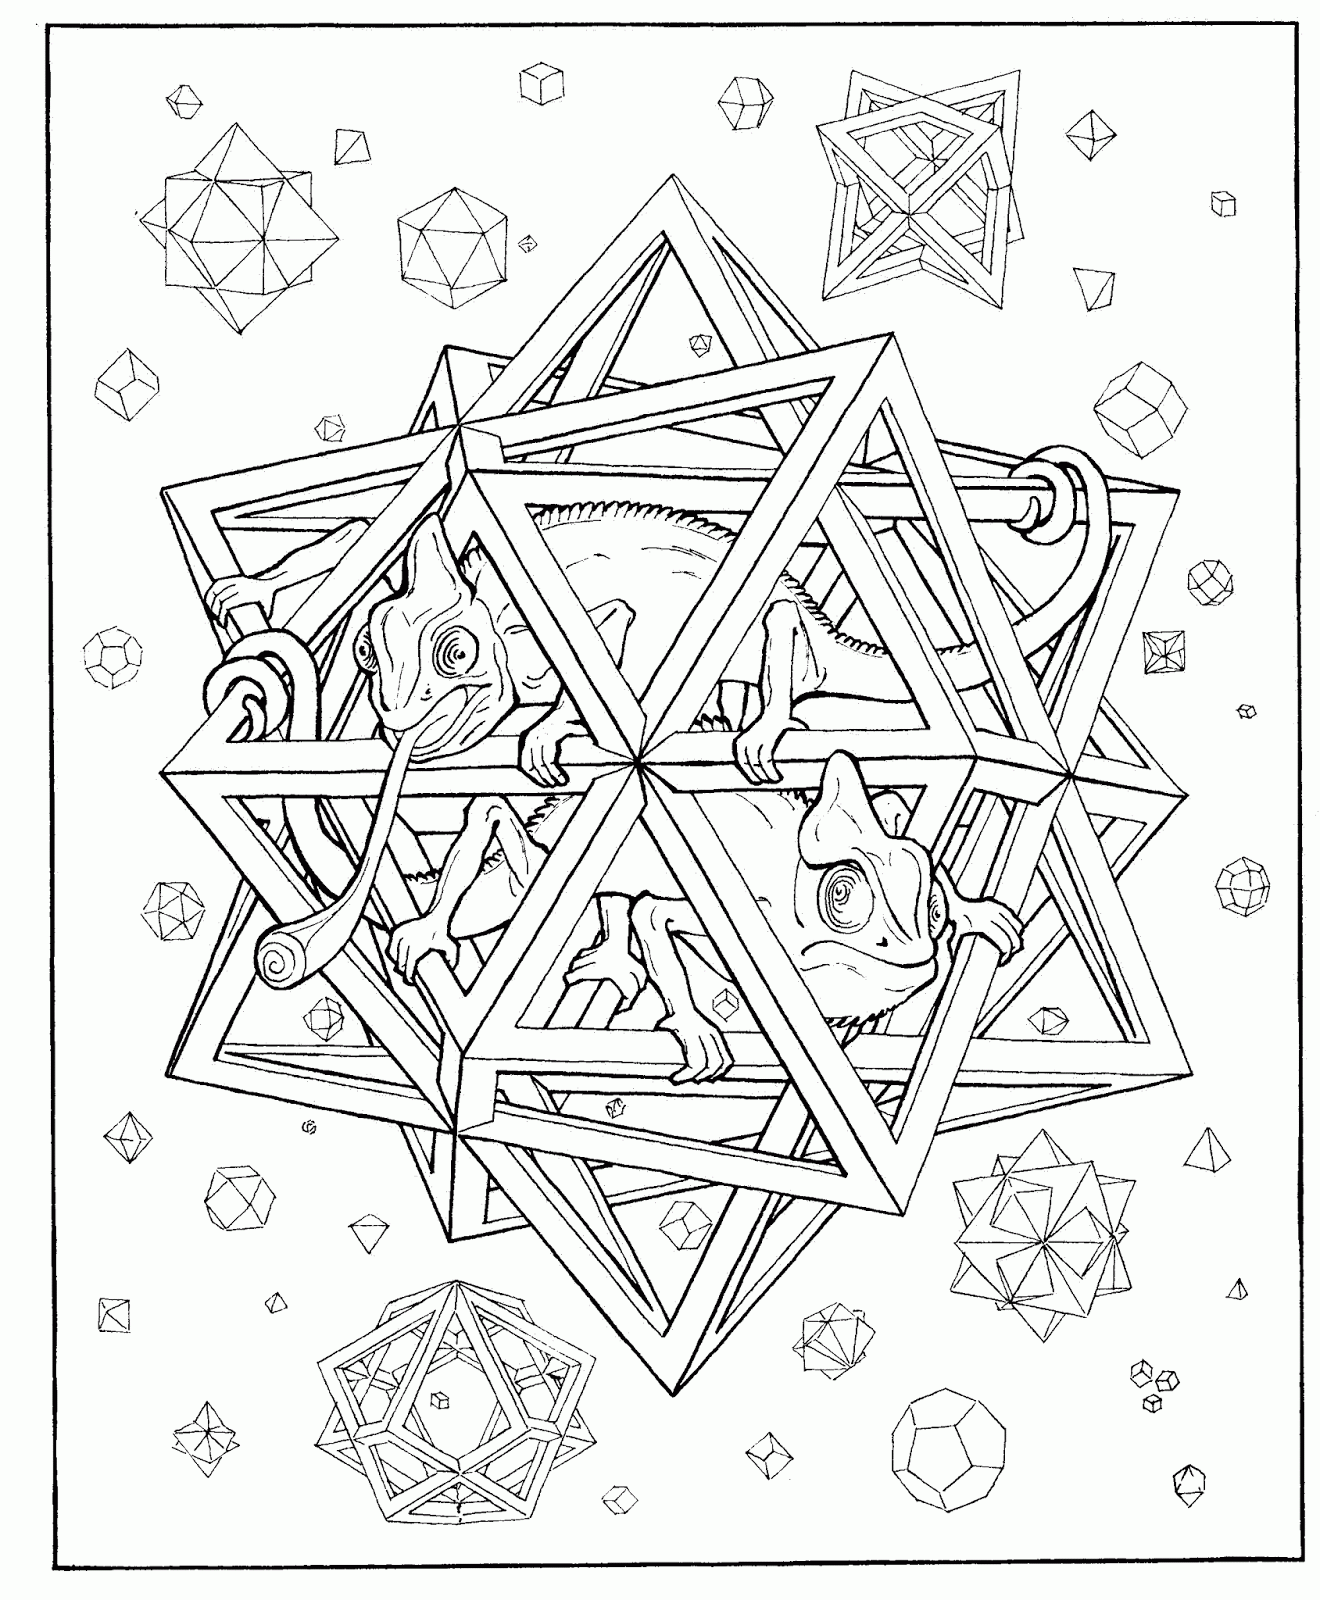 PsyAmb 20 Trippy Coloring Pages